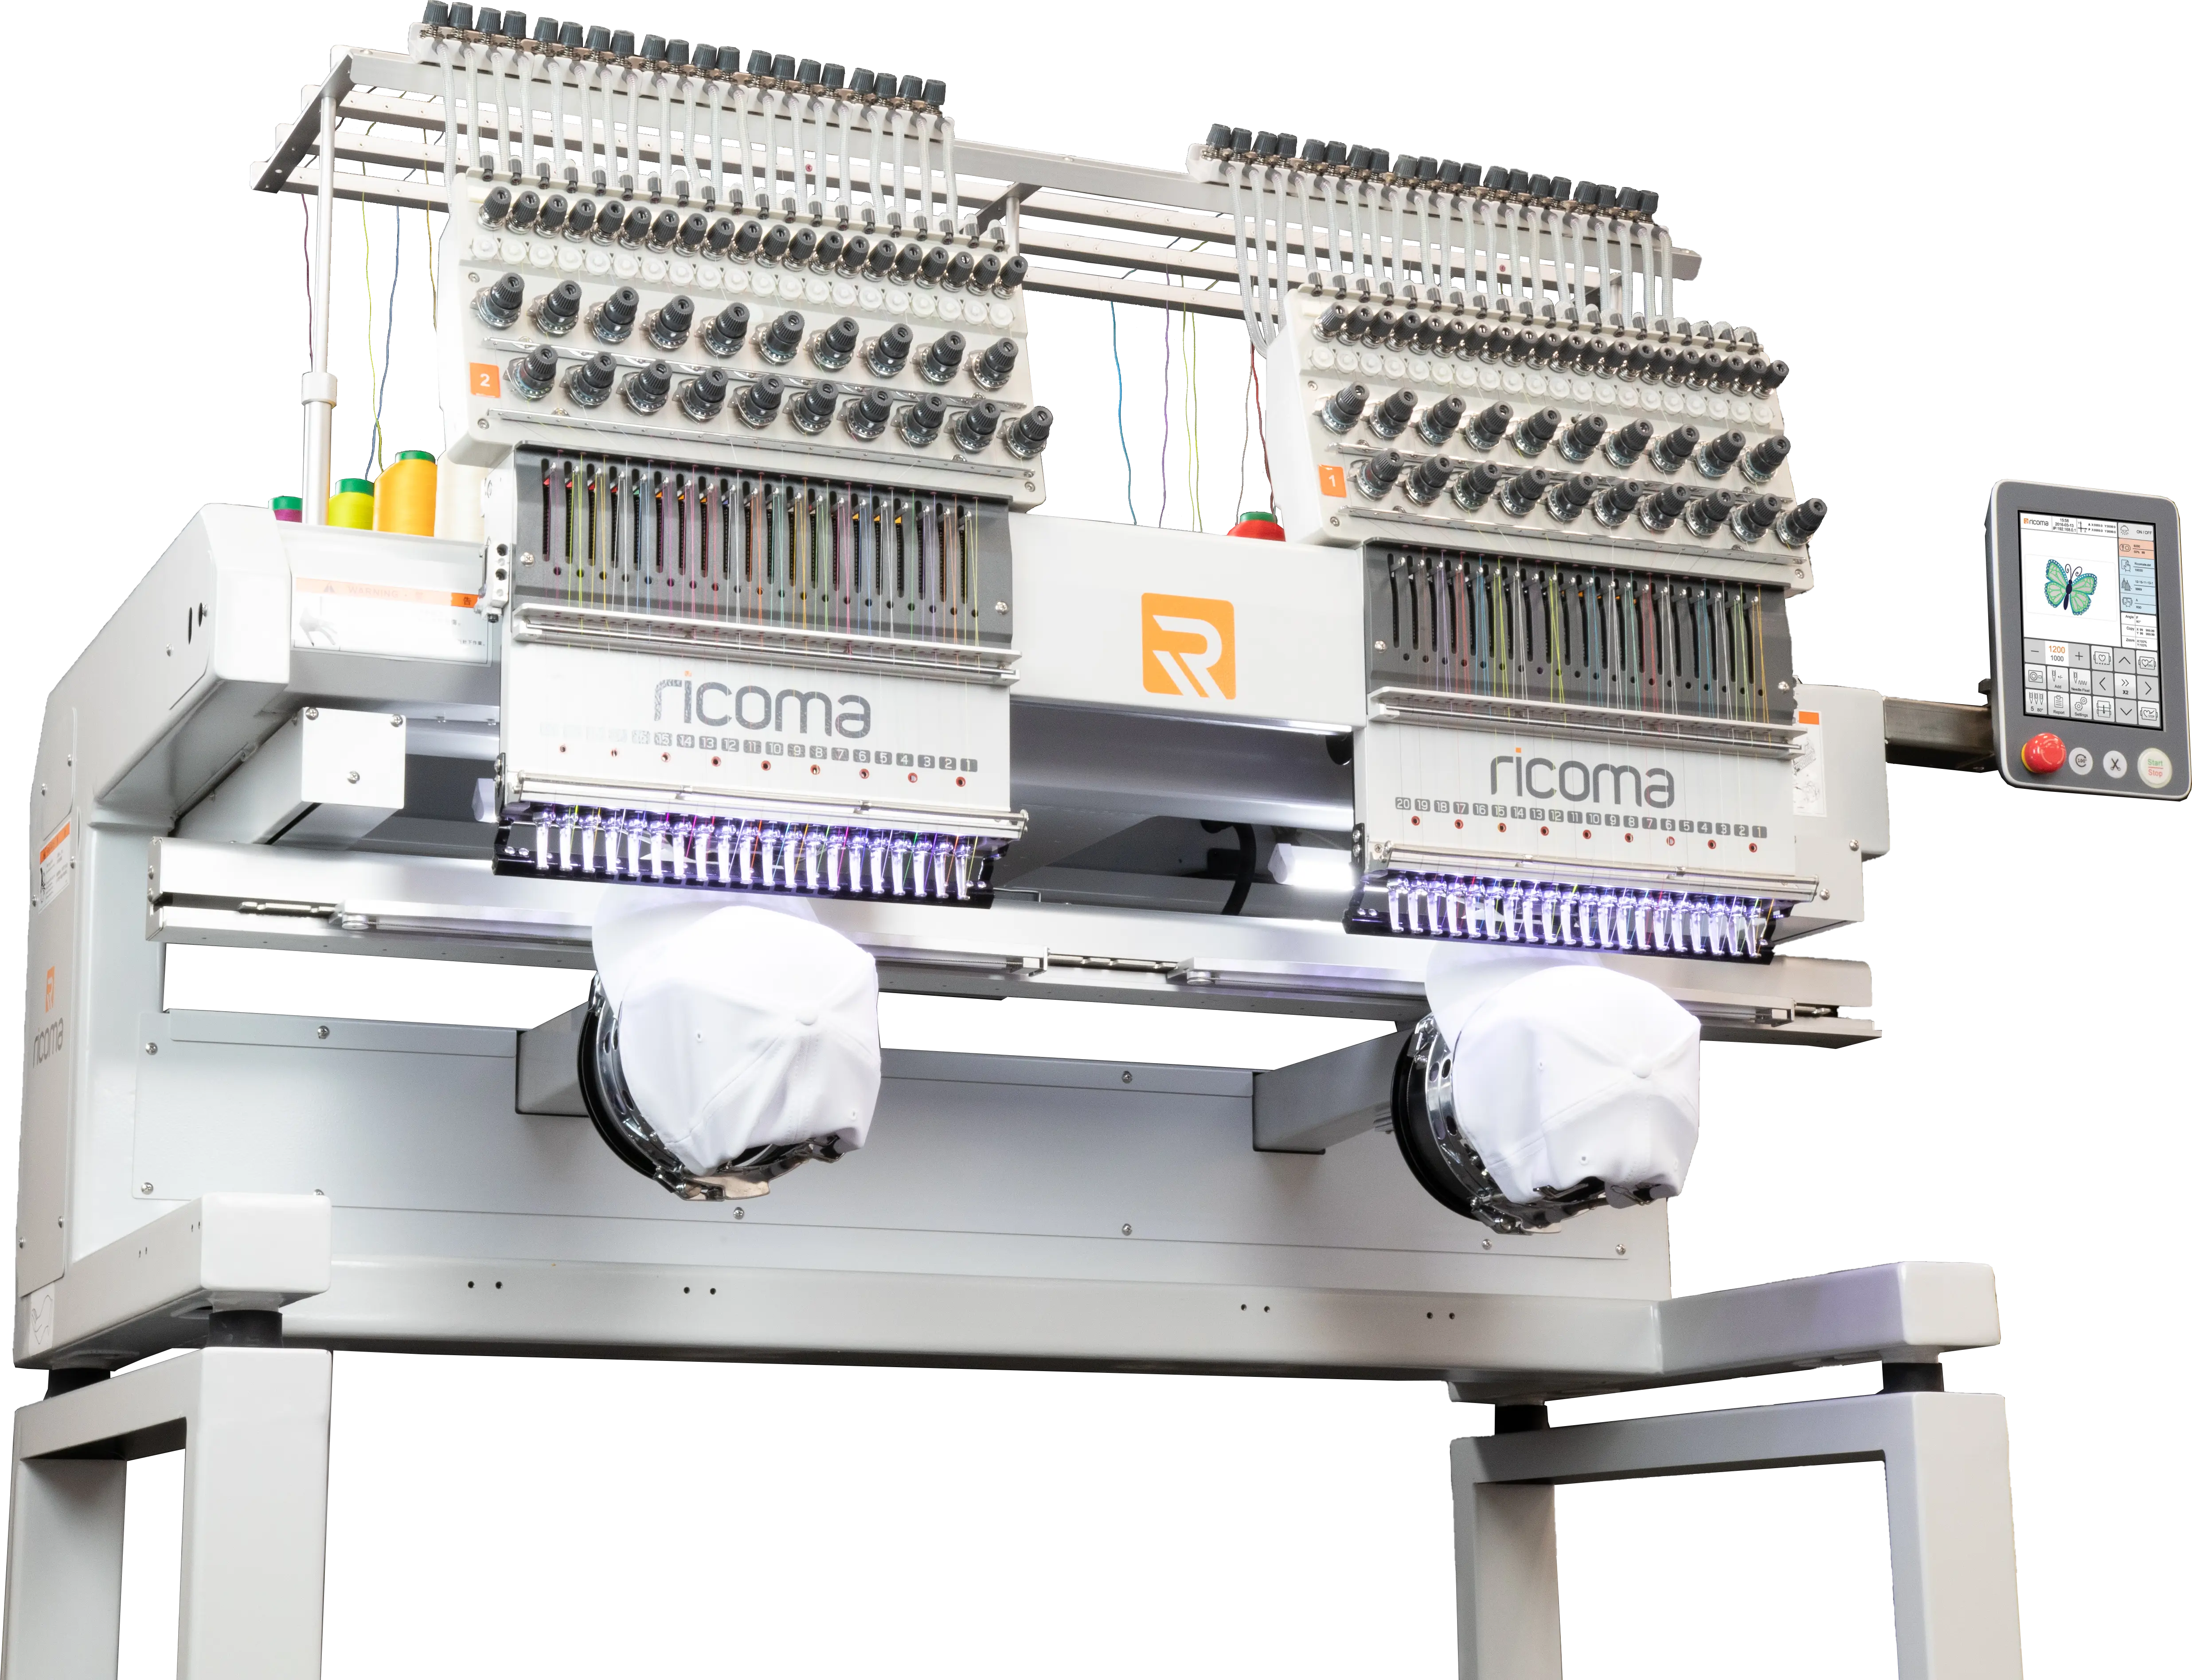 Cording, part 2 - Machine embroidery materials and technology - Machine  embroidery community